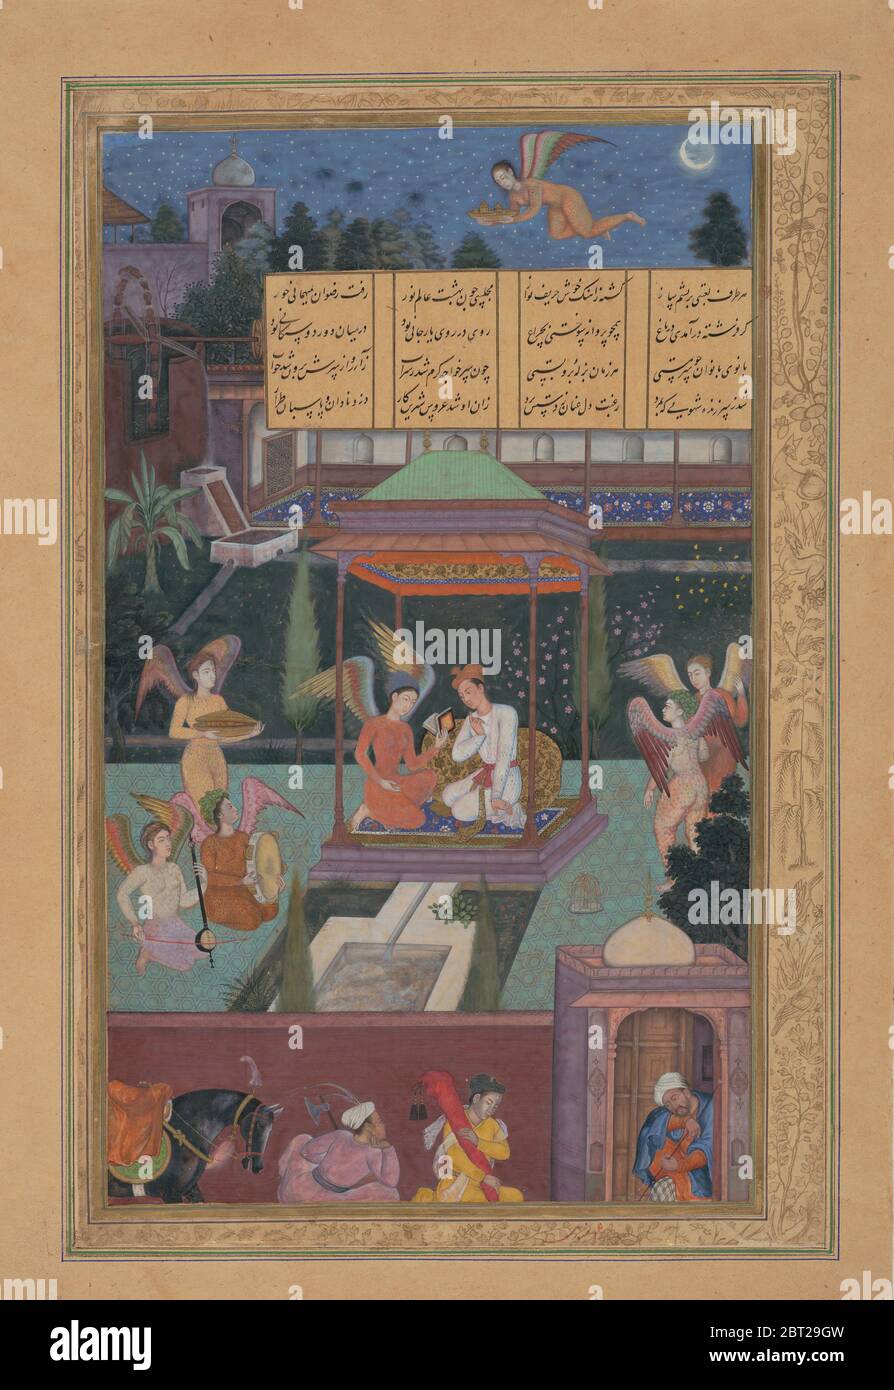 The Story of the Princess of the Blue Pavillion: The Youth of Rum Is Entertained in a Garden by a Fairy and her Maidens, Folio from a Khamsa (Quintet) of Amir Khusrau Dihlavi, 1597-98. Stock Photo